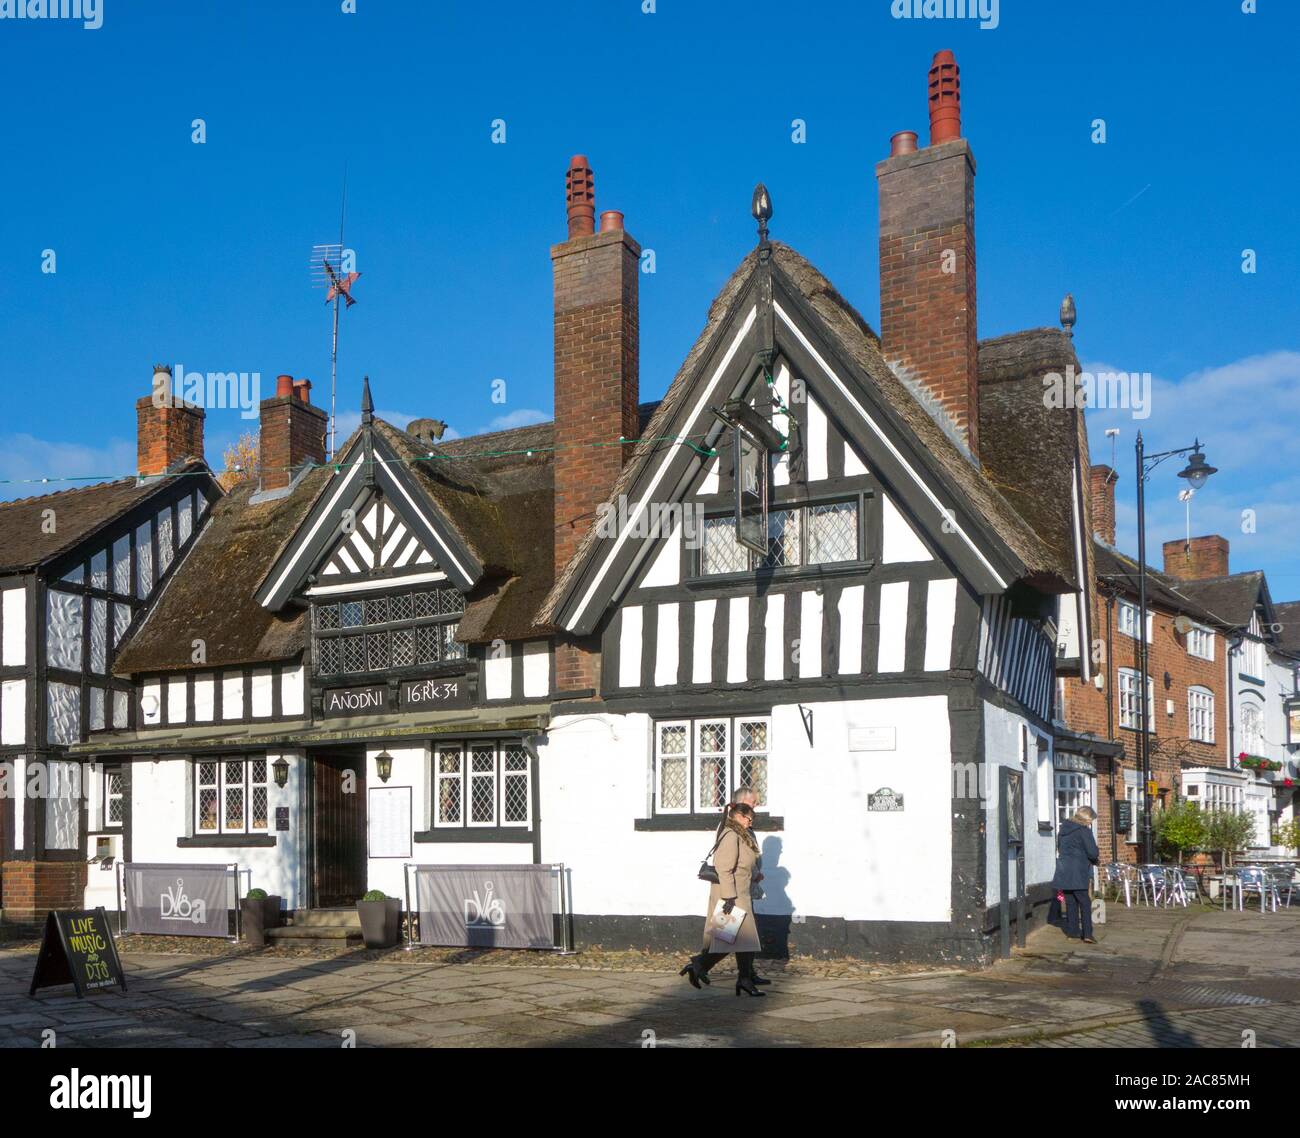 Man and woman walking past the thatched roofed Black Bear inn public house in the market square in the Cheshire town of Sandbach Stock Photo